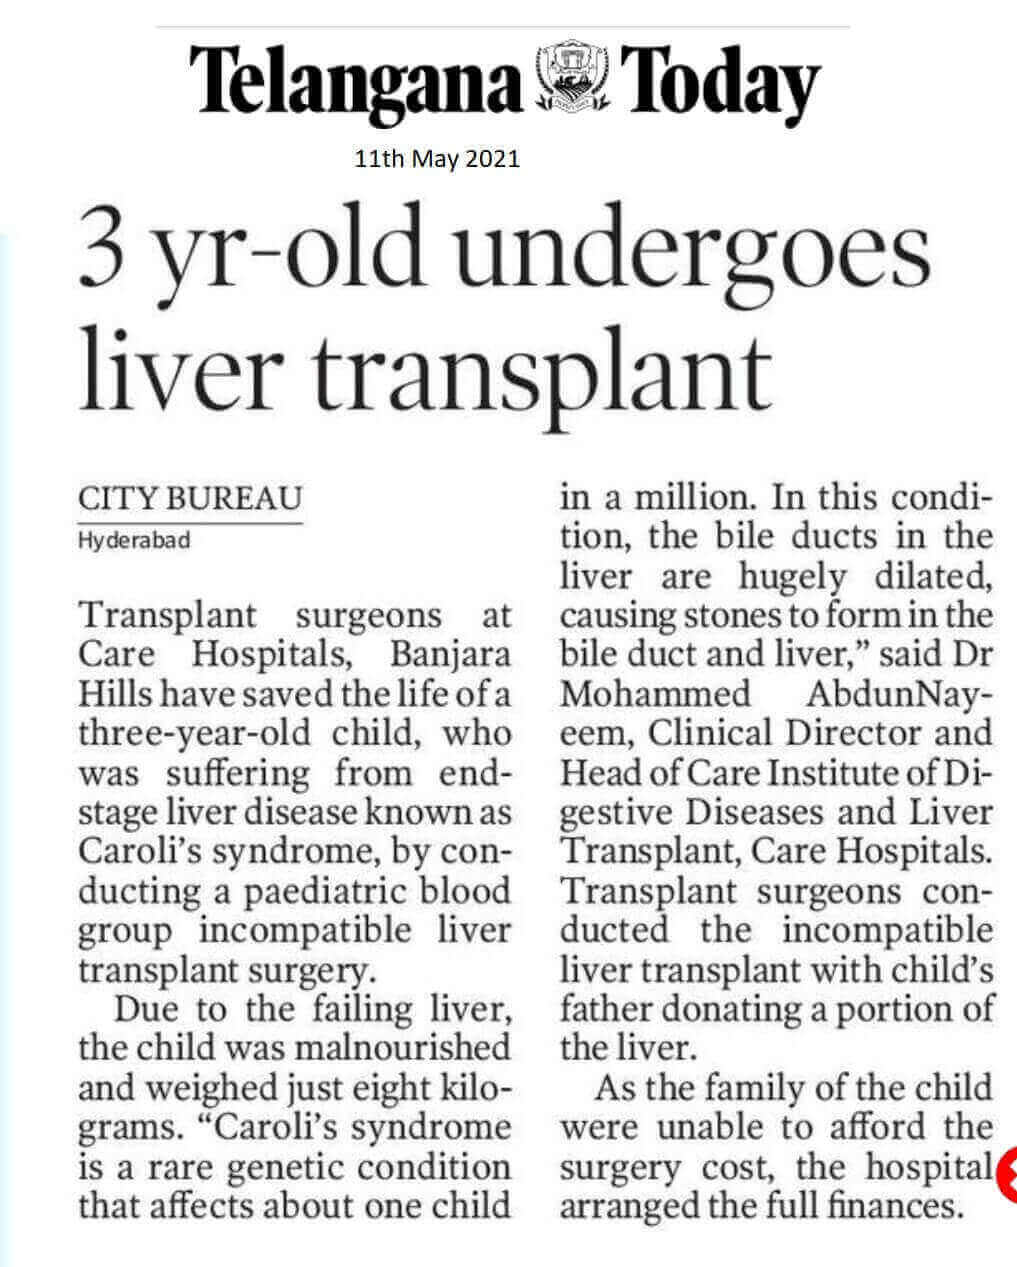 3-Year-old Undergoes Liver Transplant by  Dr. Mohammed Abdun Nayeem - Clinical Director & HOD - CARE Institute of Digestive Diseases & Liver Transplant